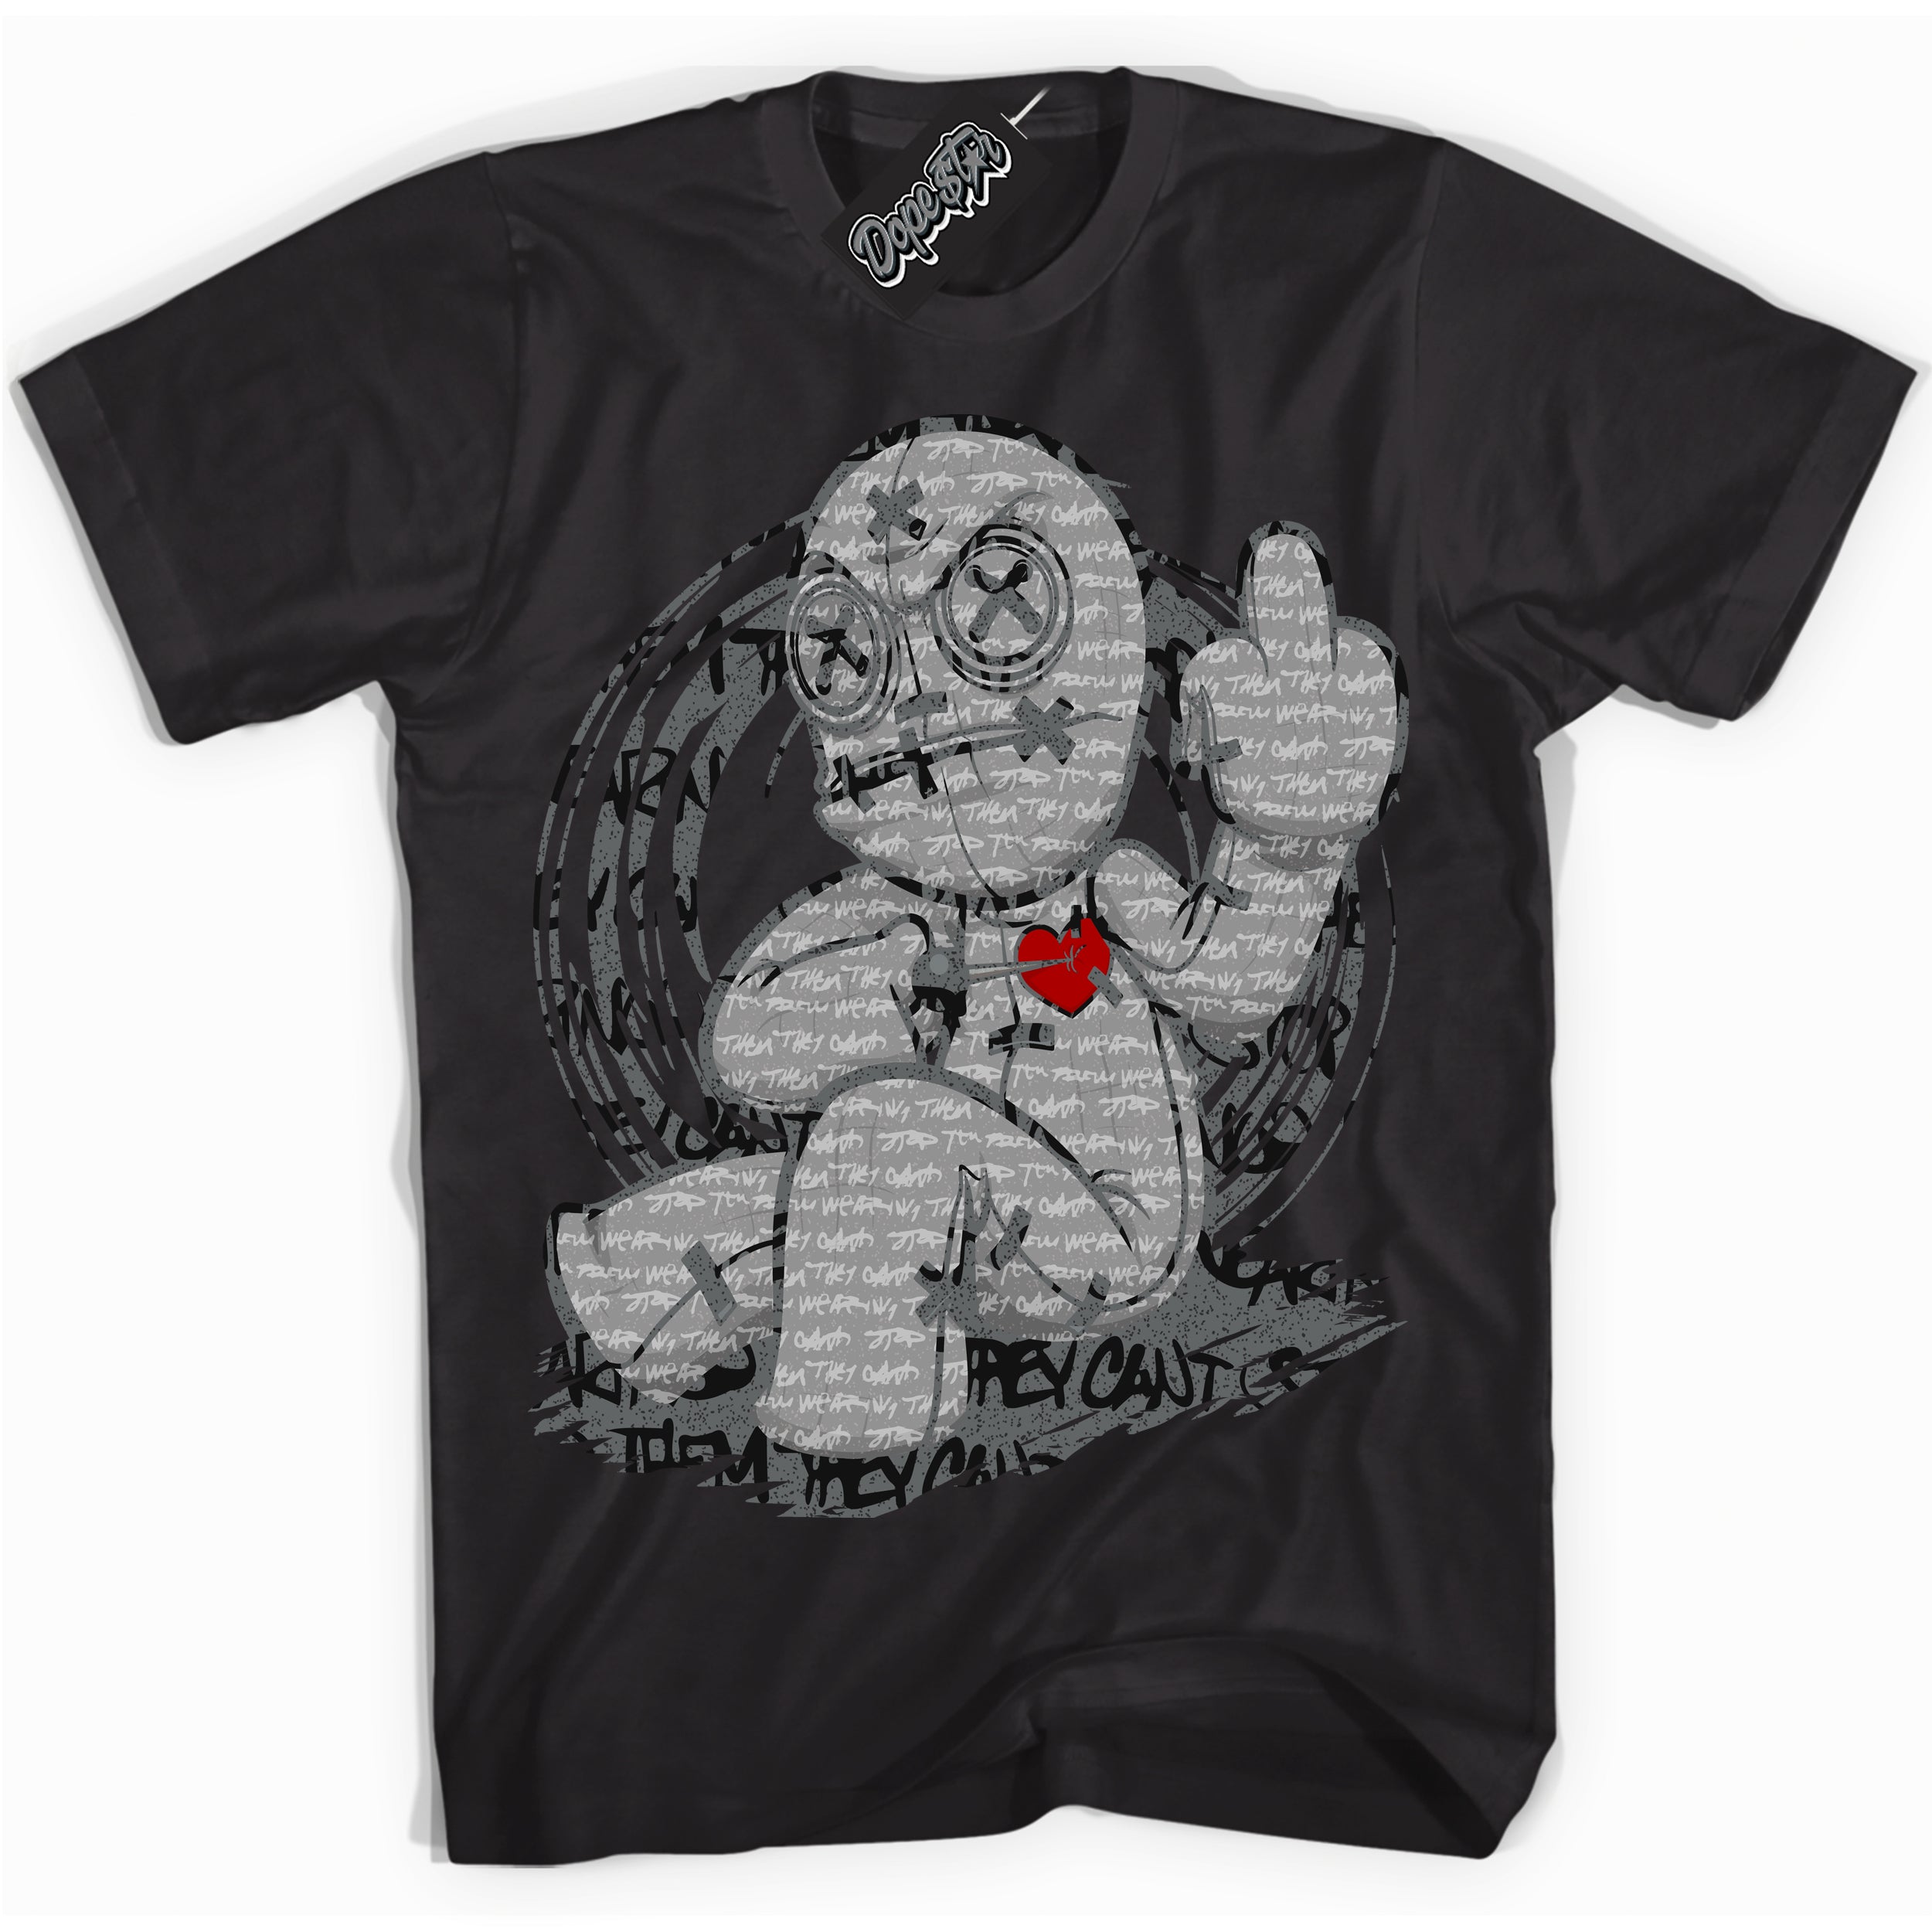 Cool Black Shirt with “ VooDoo Doll ” design that perfectly matches Rebellionaire 1s Sneakers.